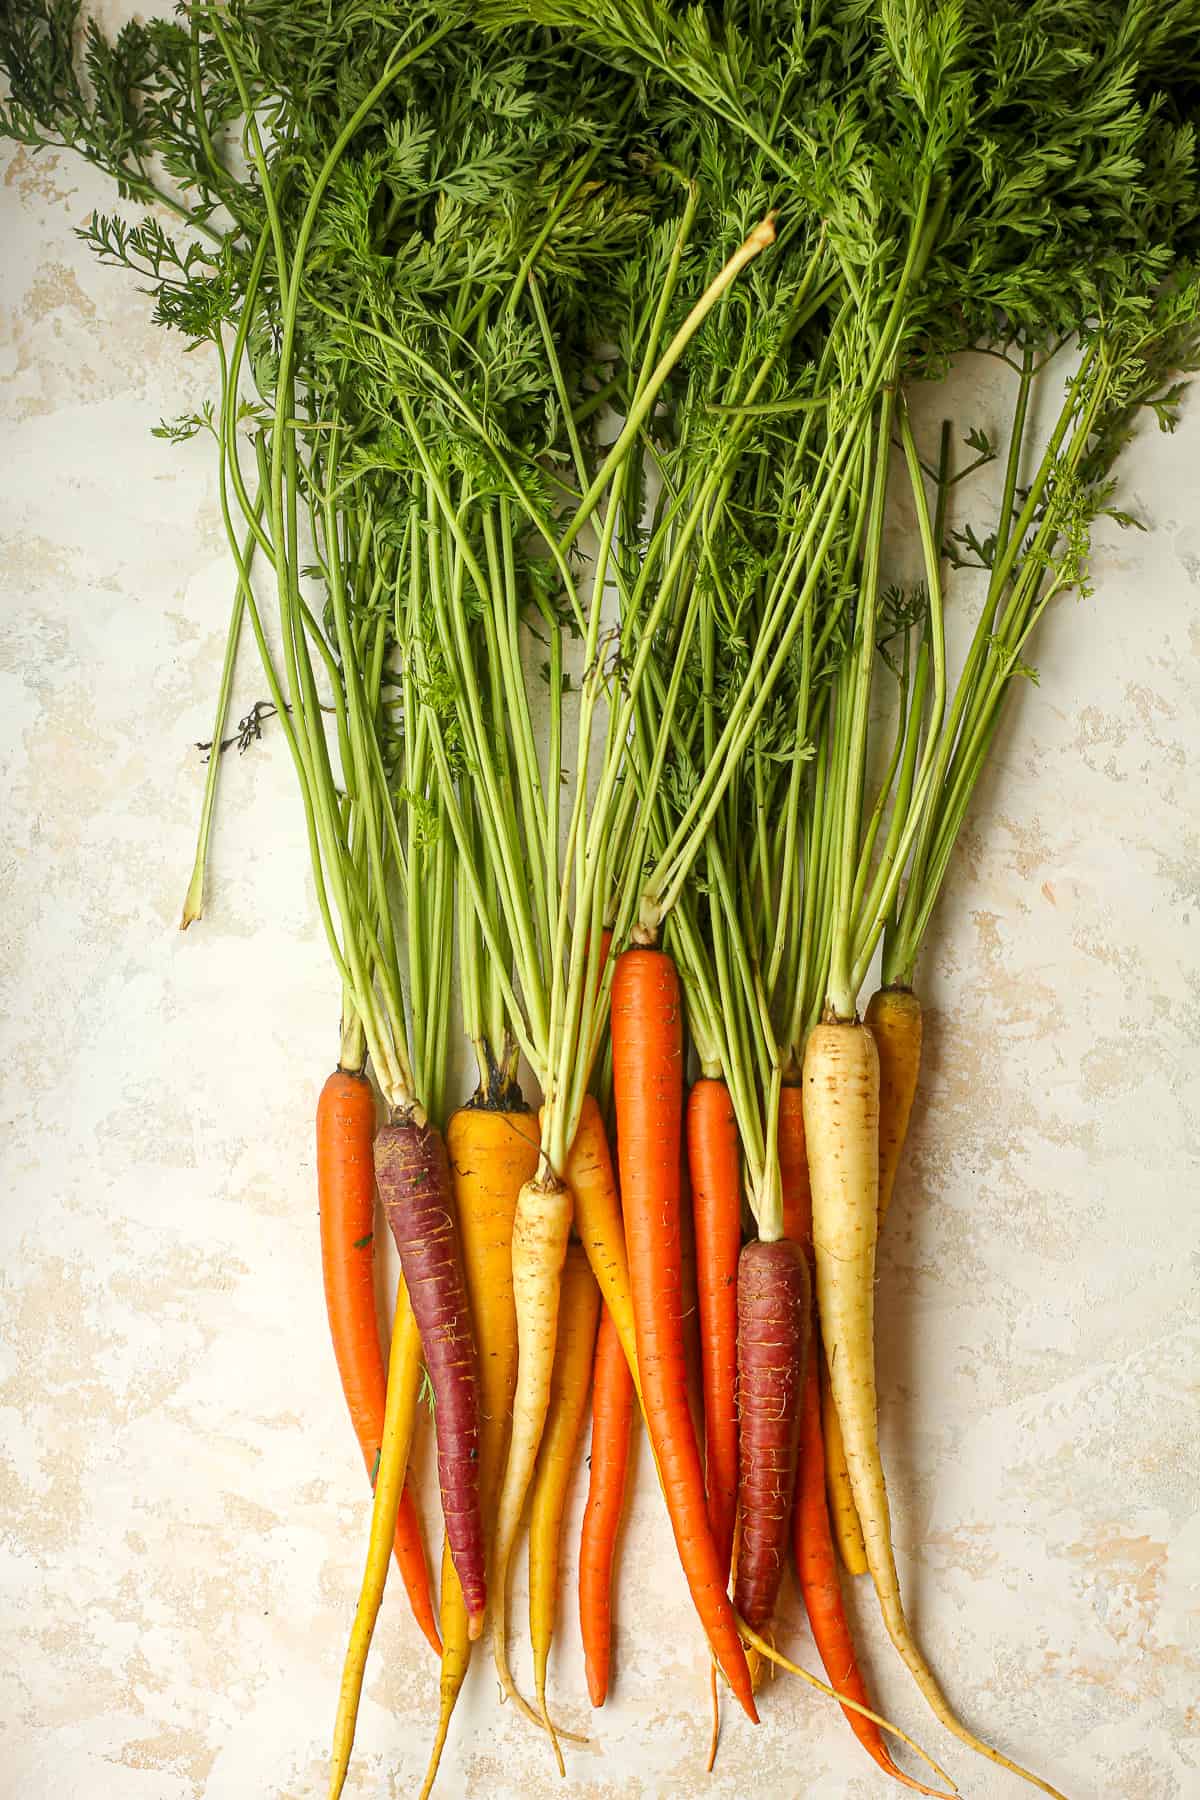 Some raw carrots with the bushy green leaves attached.